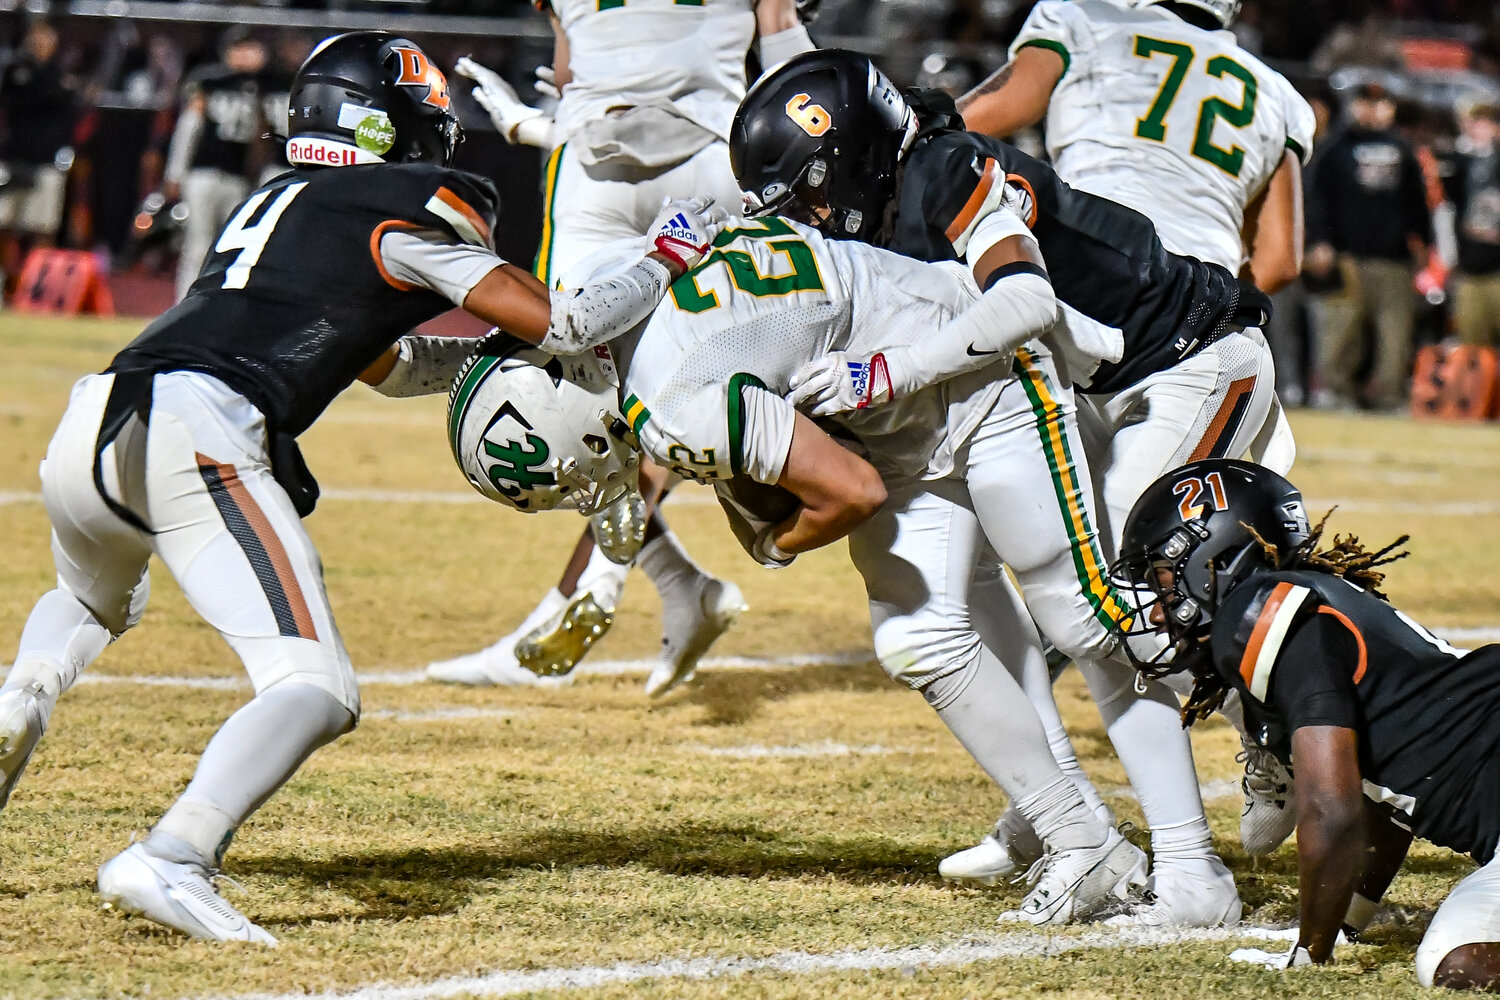 to bring down Horizon sophomore running back Bode Zamorano during the Scorpions' 18-15 victory in a 5A conference semifinal Nov. 24 at Desert Edge.